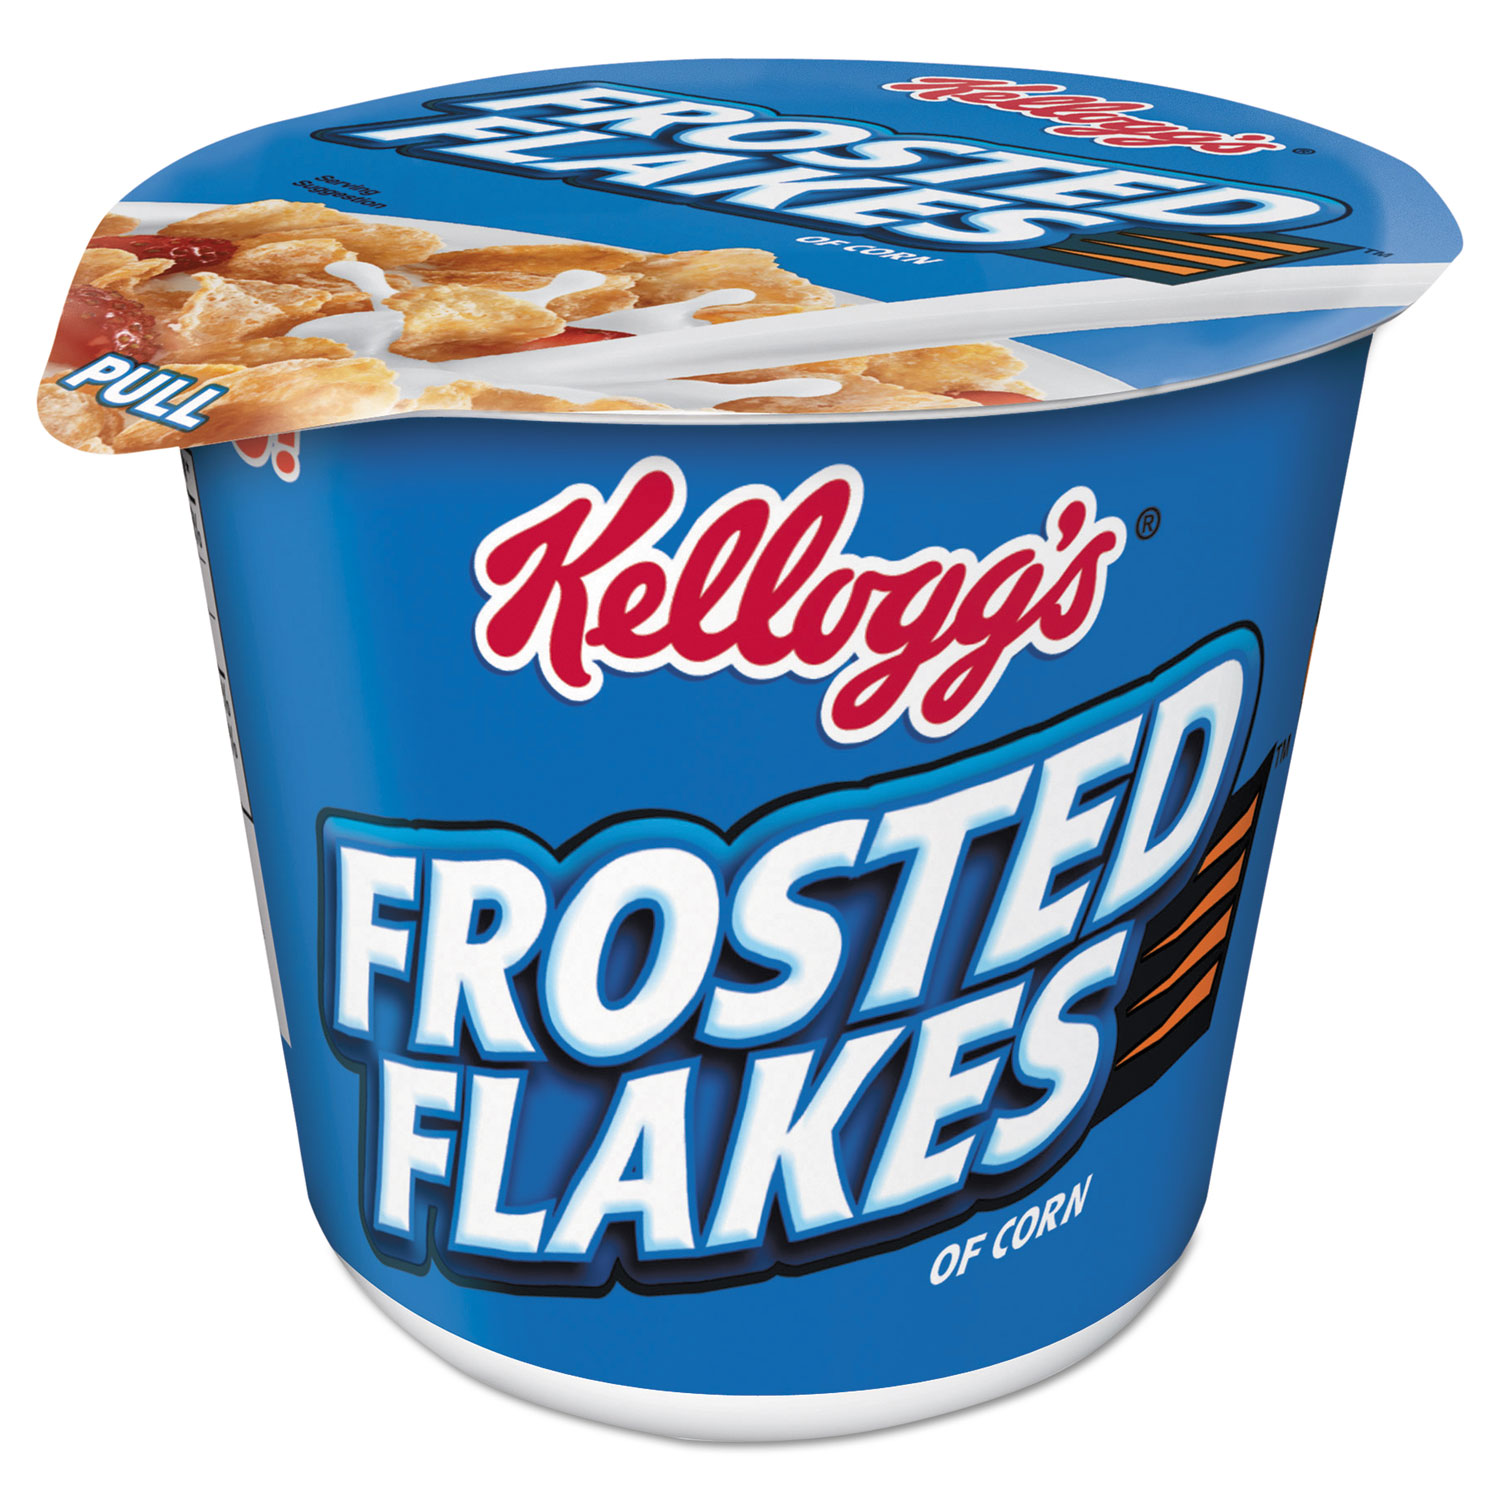 Breakfast Cereal, Frosted Flakes, Single-Serve 2.1oz Cup, 6/Box